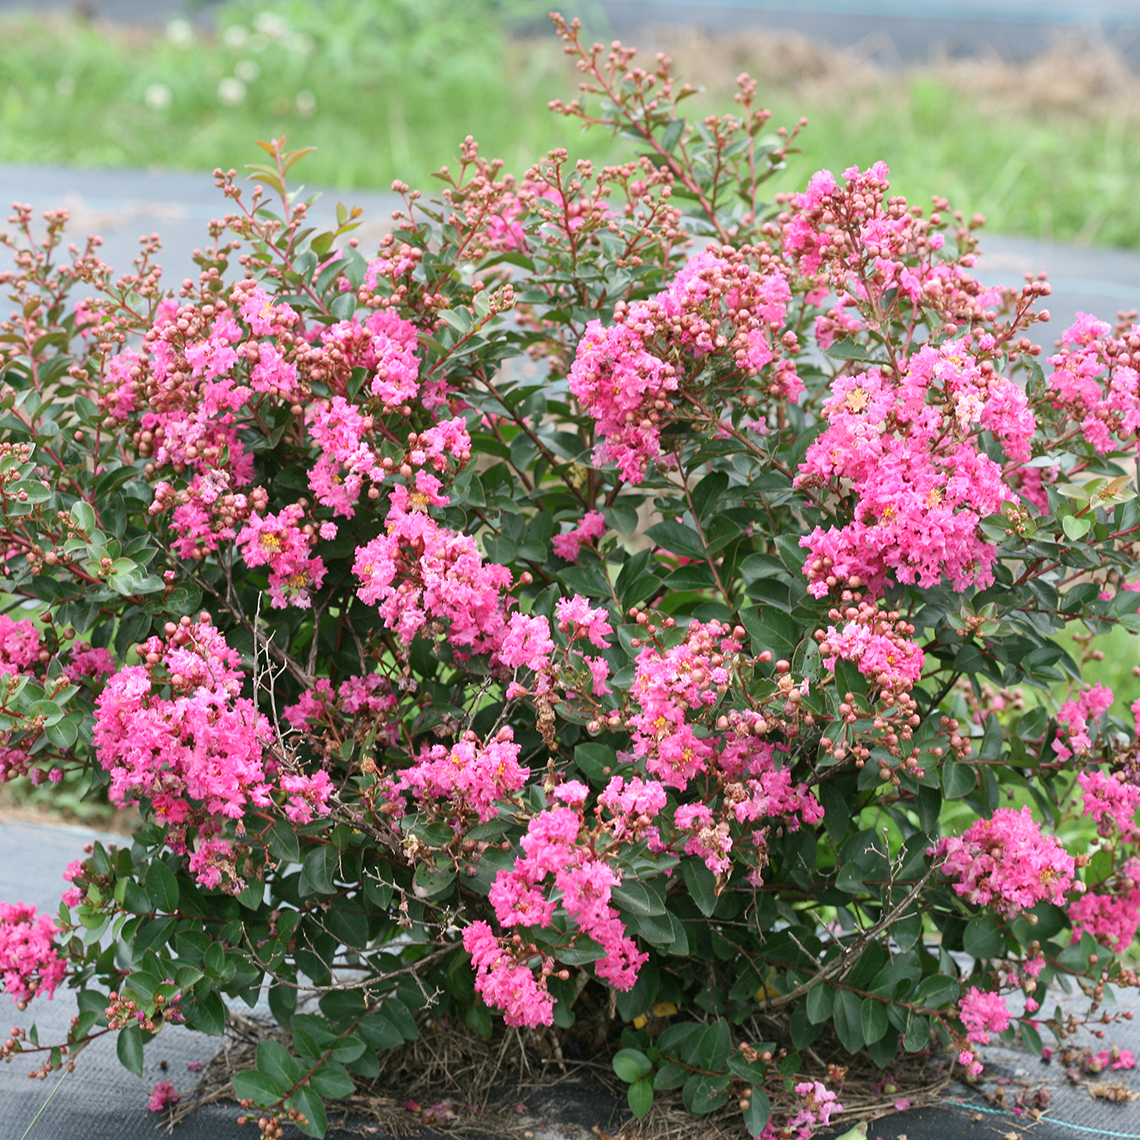 Infinitini Brite Pink Lagerstroemia heavy bloom and bud set